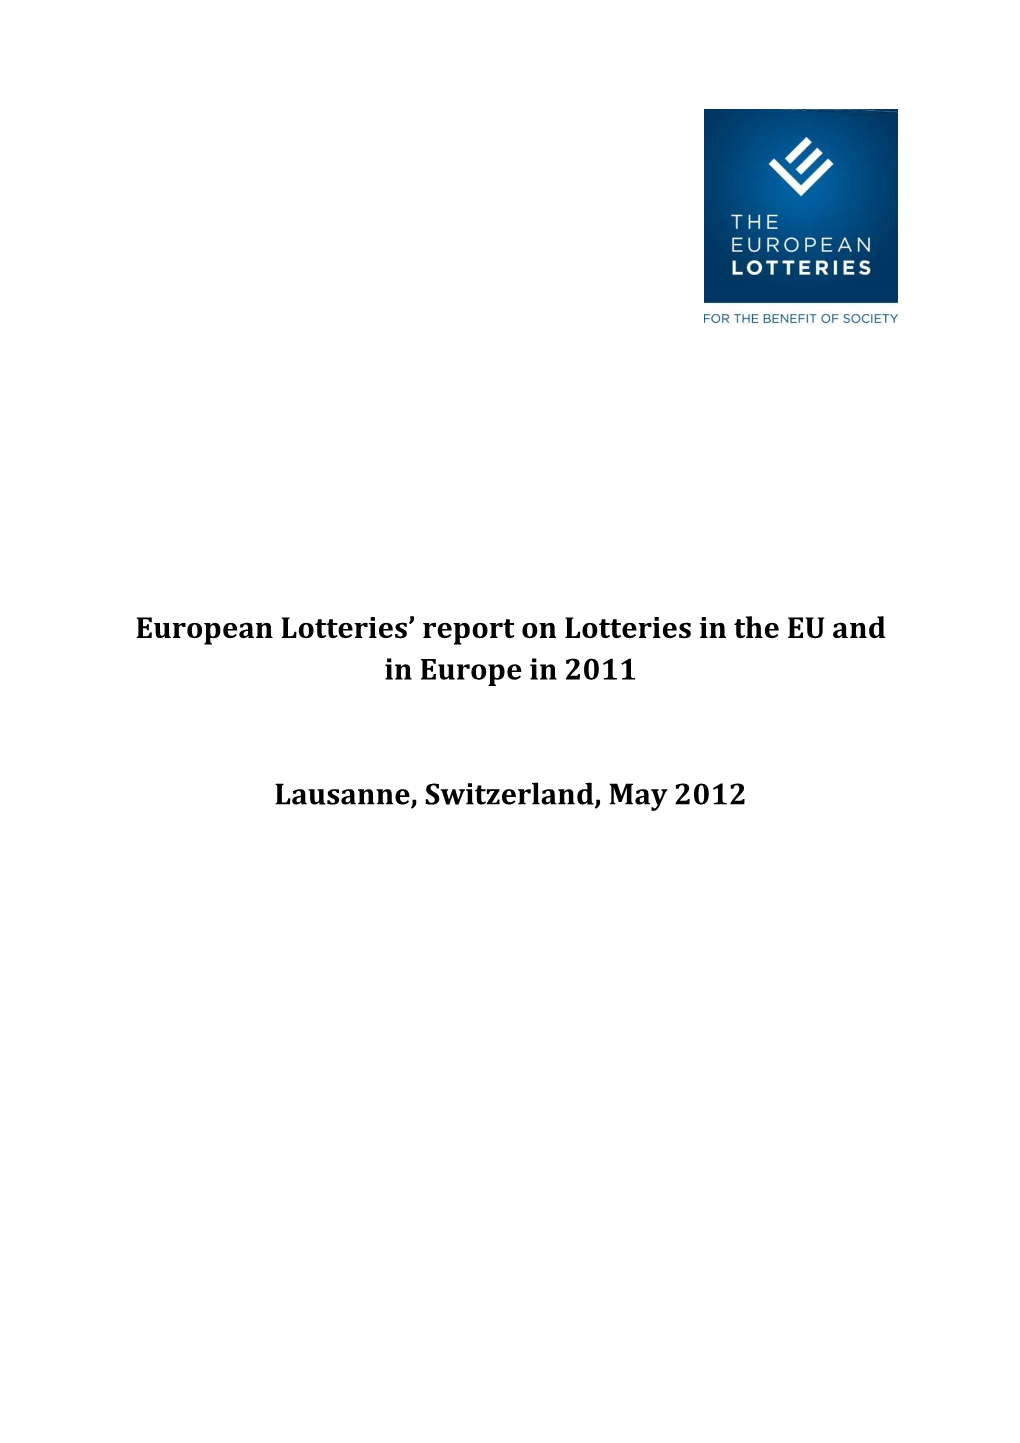 European Lotteries' Report on Lotteries in the EU and in Europe in 2011 Lausanne, Switzerland, May 2012